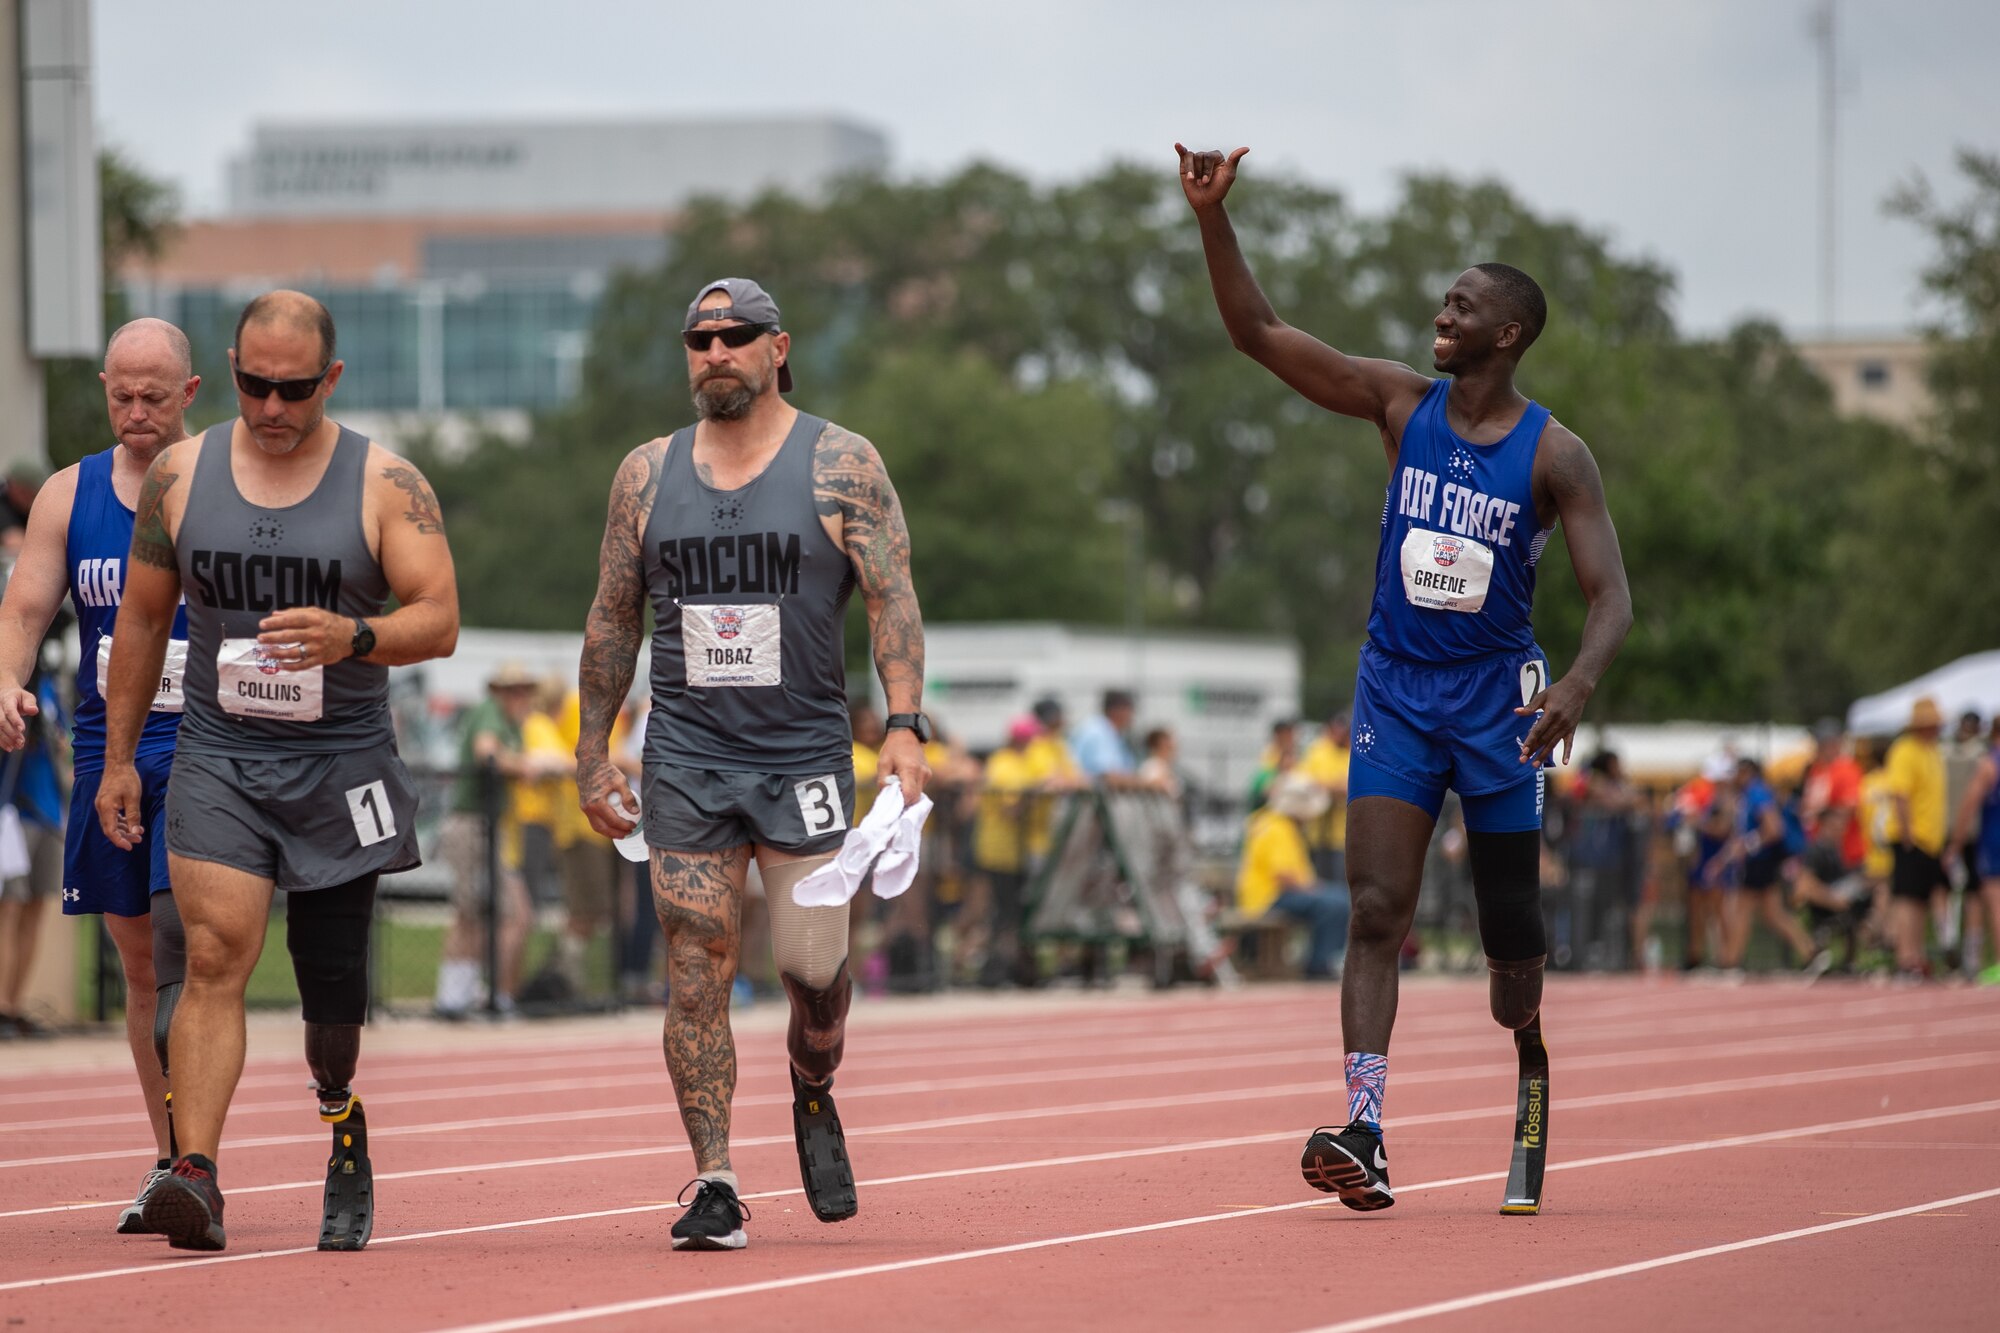 Air Force Reserve, Staff Sgt. Kevin Greene waves to his family in the stands as he walks to his starting position for the 800 meter race at the 2019 DoD Warrior Games.  Warrior Games is a Paralympic style sporting event with 300 athletes from all DoD service branches and five international coalition partners.  Active duty and veteran wounded warriors compete in 13 adaptive sports to inspire recovery, support rehabilitation and generate a wider understanding and respect of those who serve their country